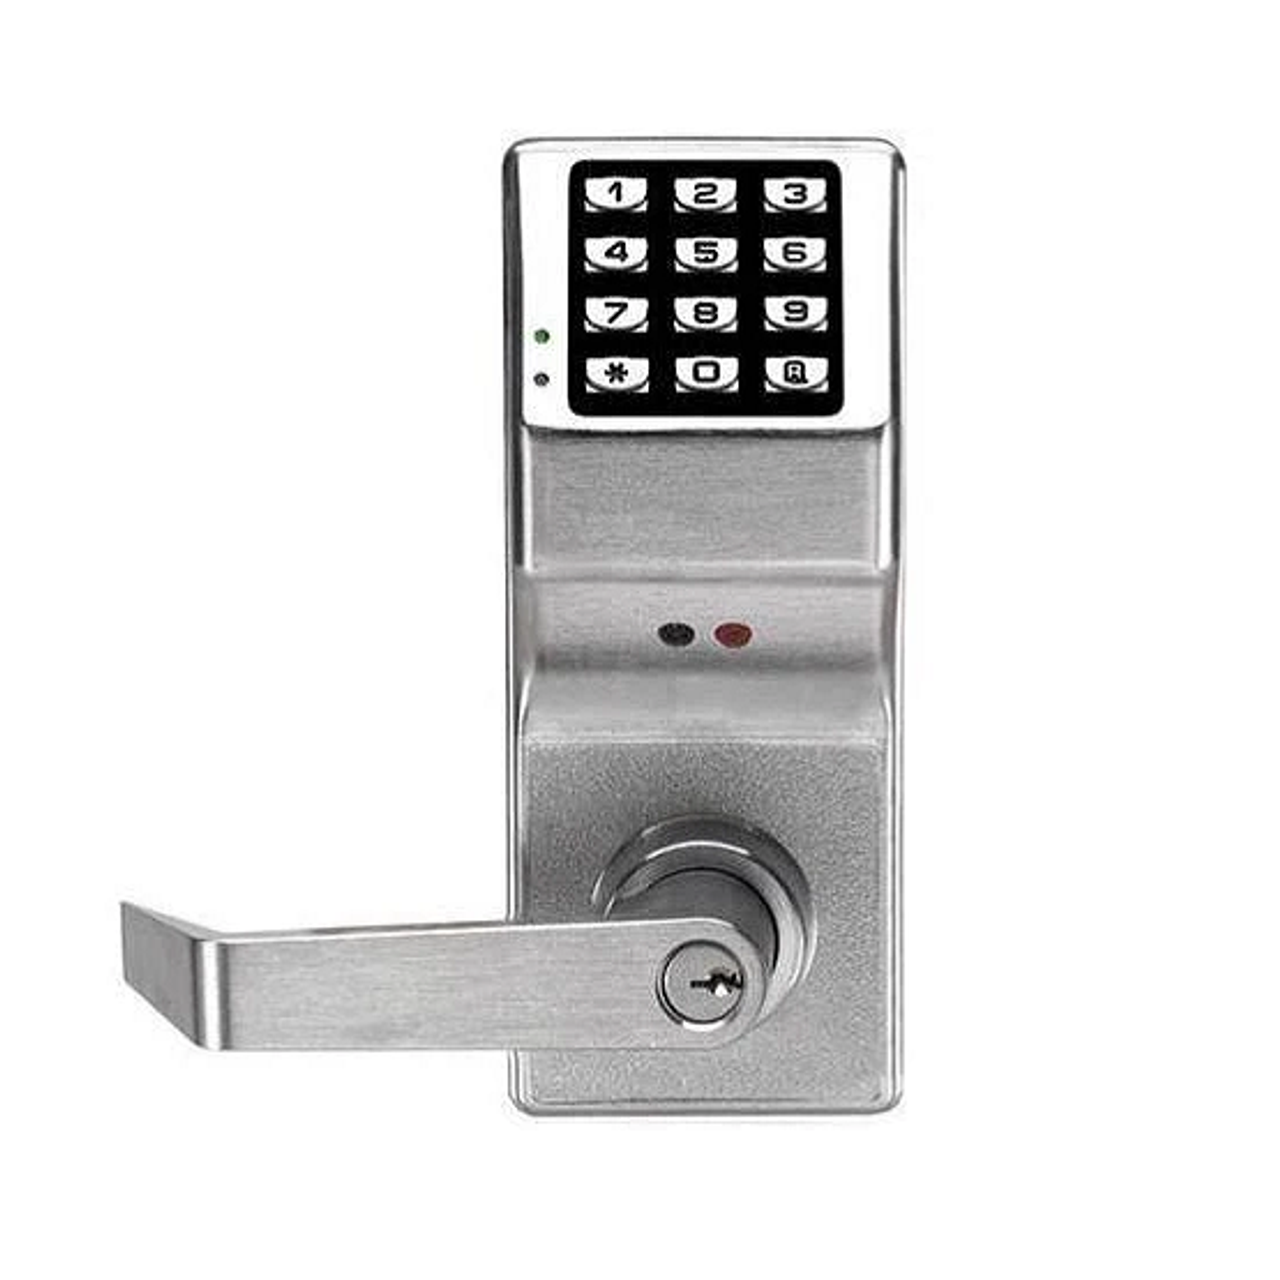 Alarm Lock DL2800 Series Standalone Digital Pushbutton Cylindrical Lock  with Audit Trail, Weatherproof,